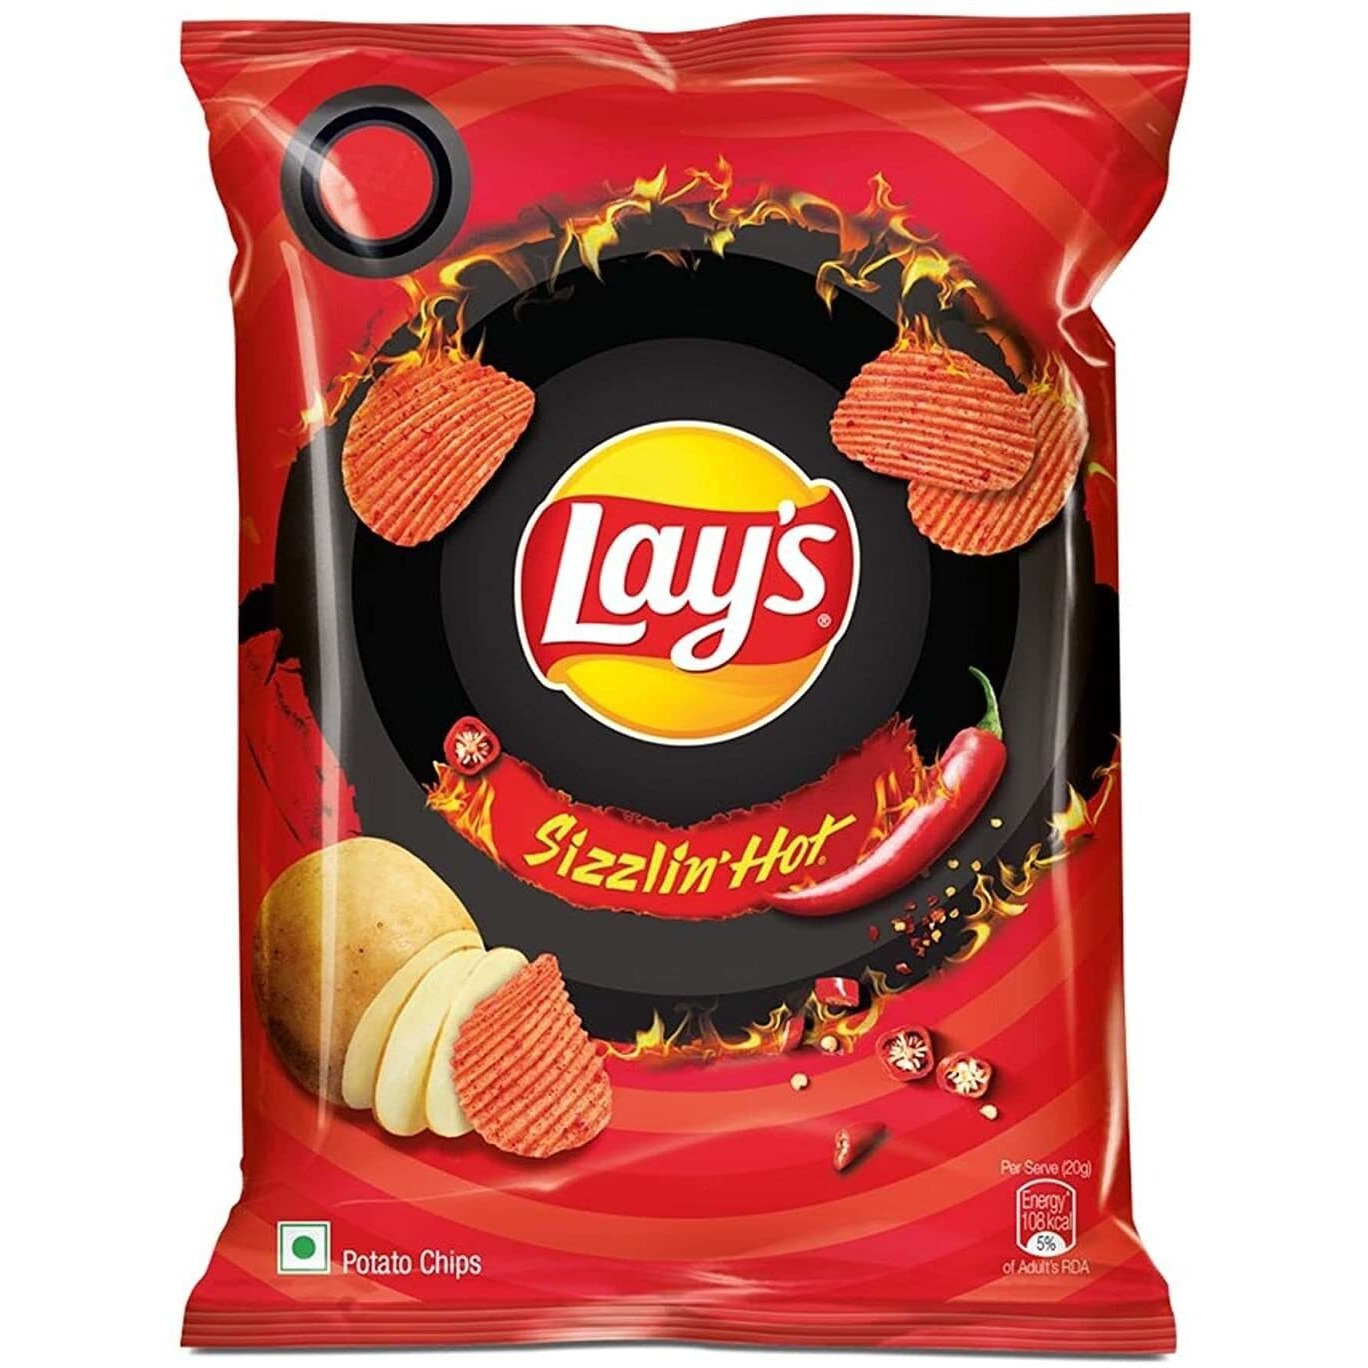 Lay's Sizzling Hot Chips - 48 Gm (1.69 Oz)